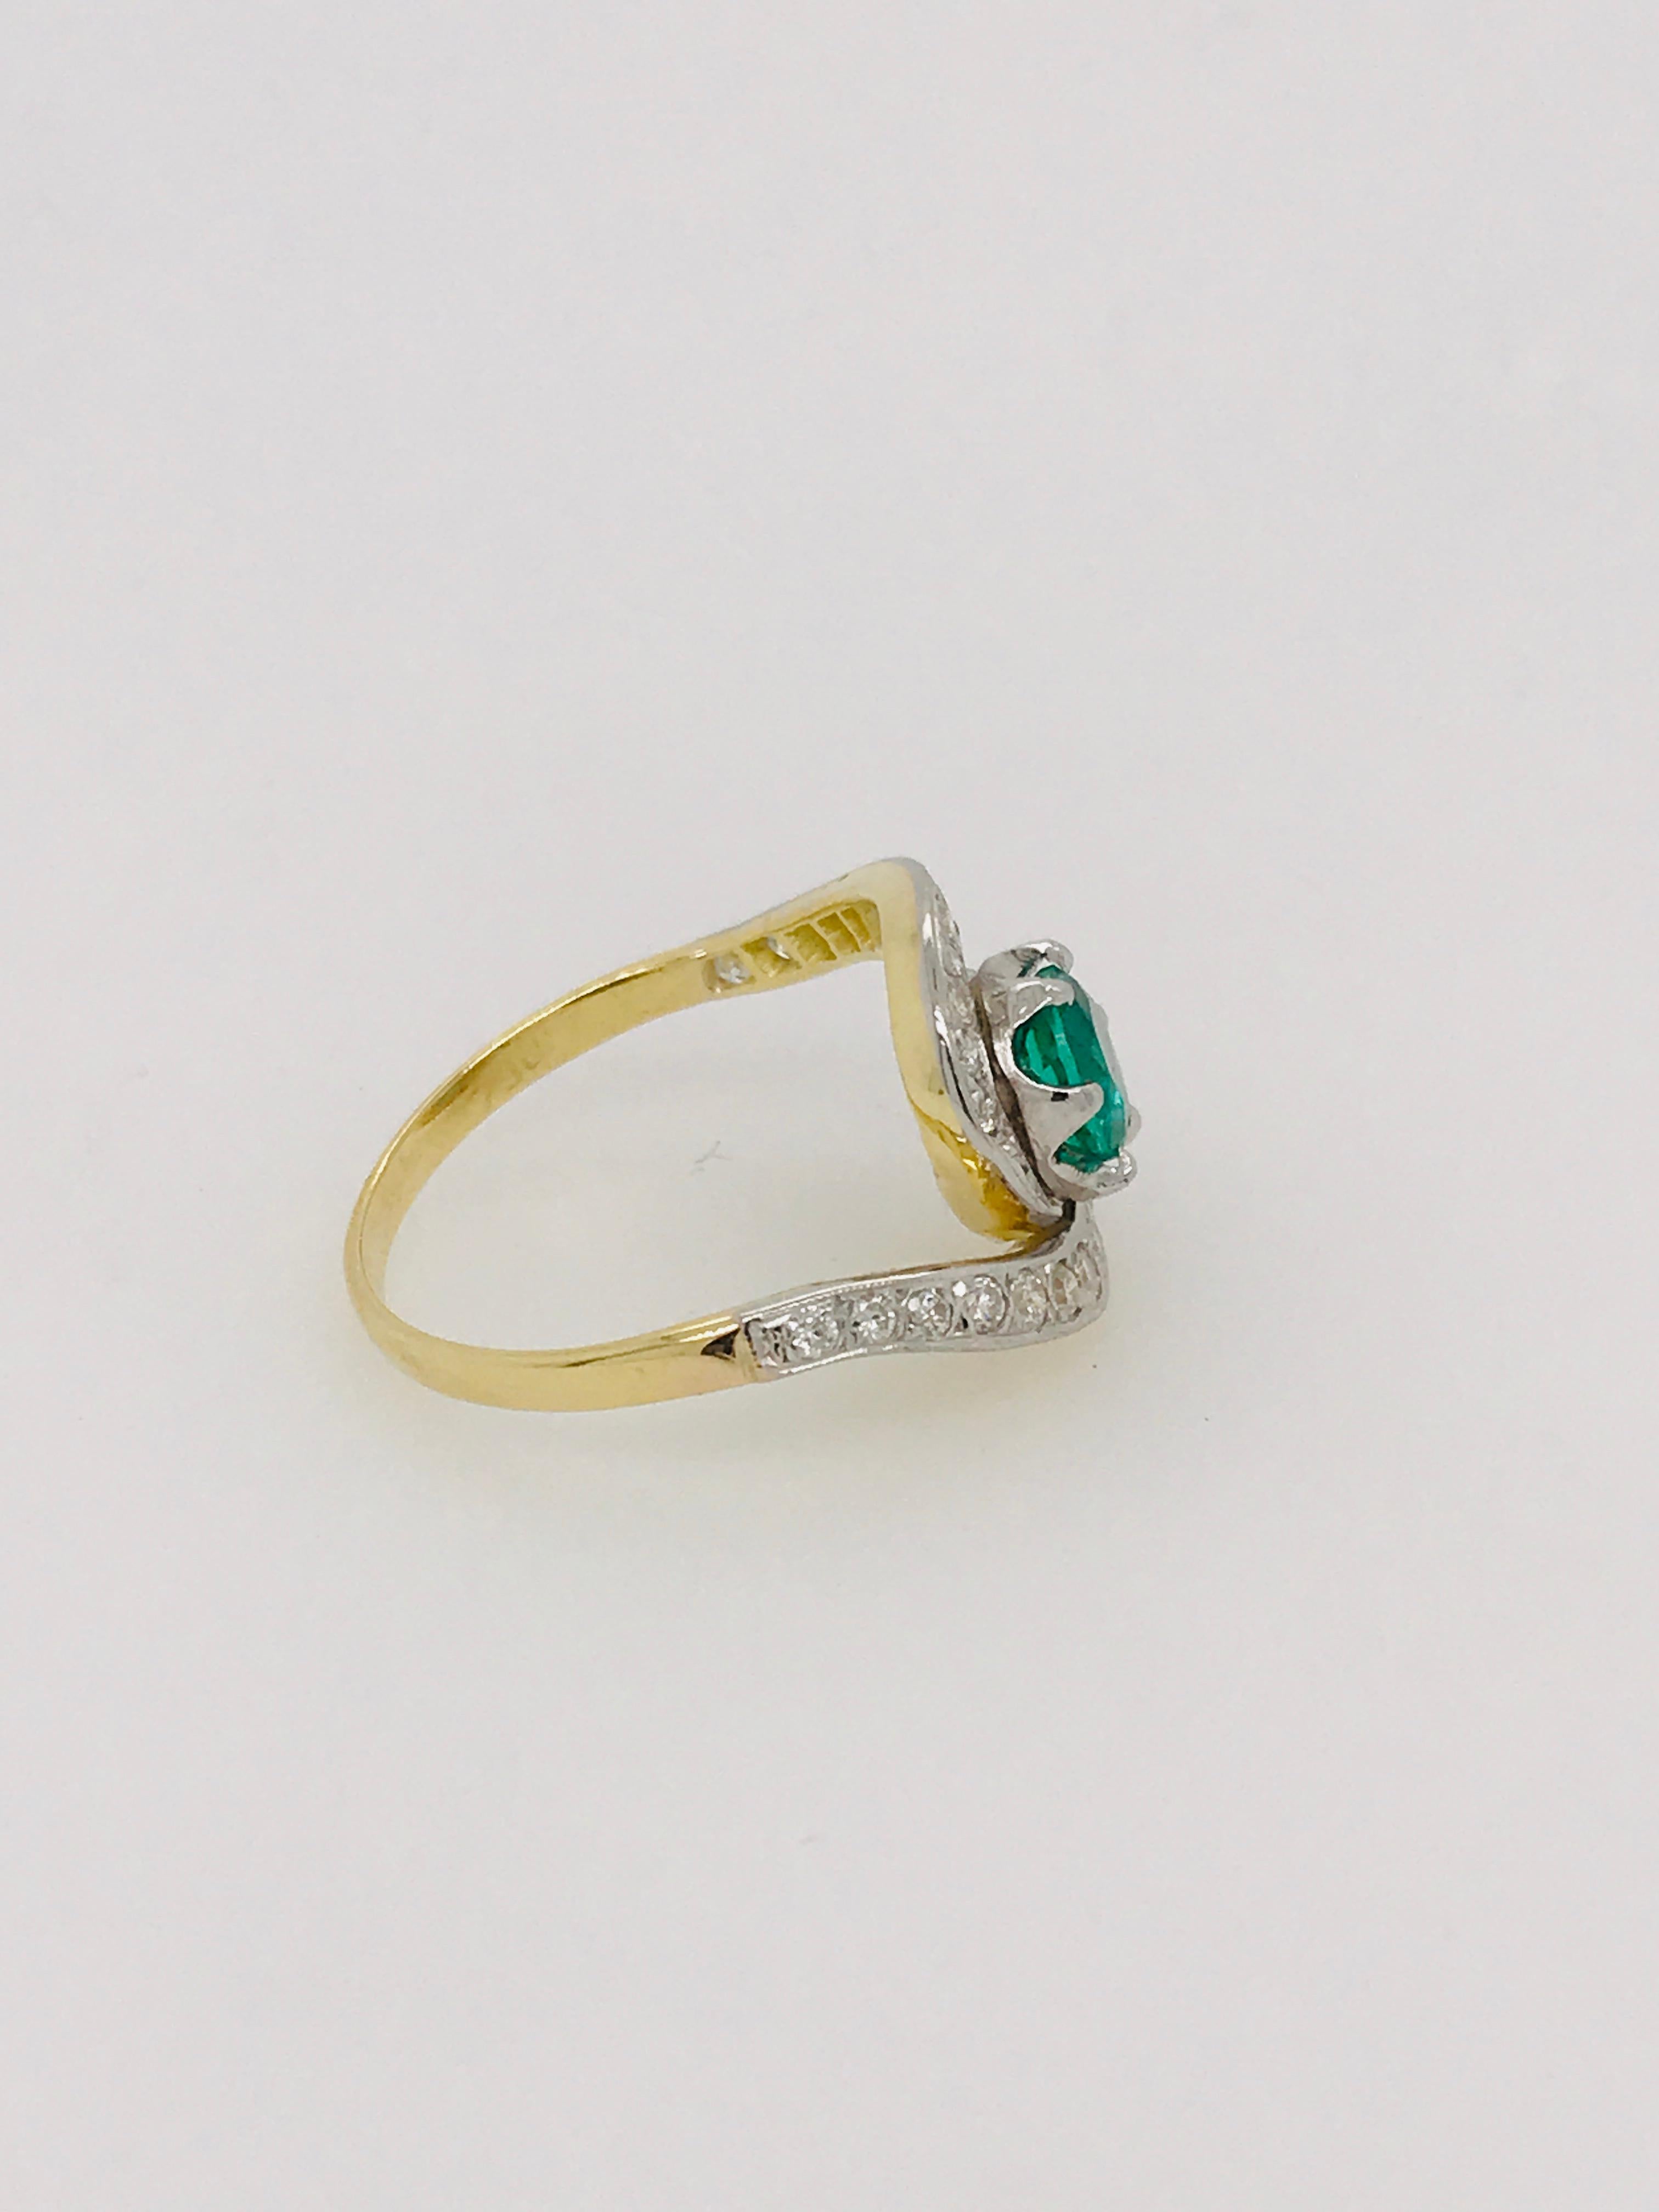 Round Cut Round Emerald and Grain Set Diamond Ring Set in 18ct White Gold and Yellow Gold